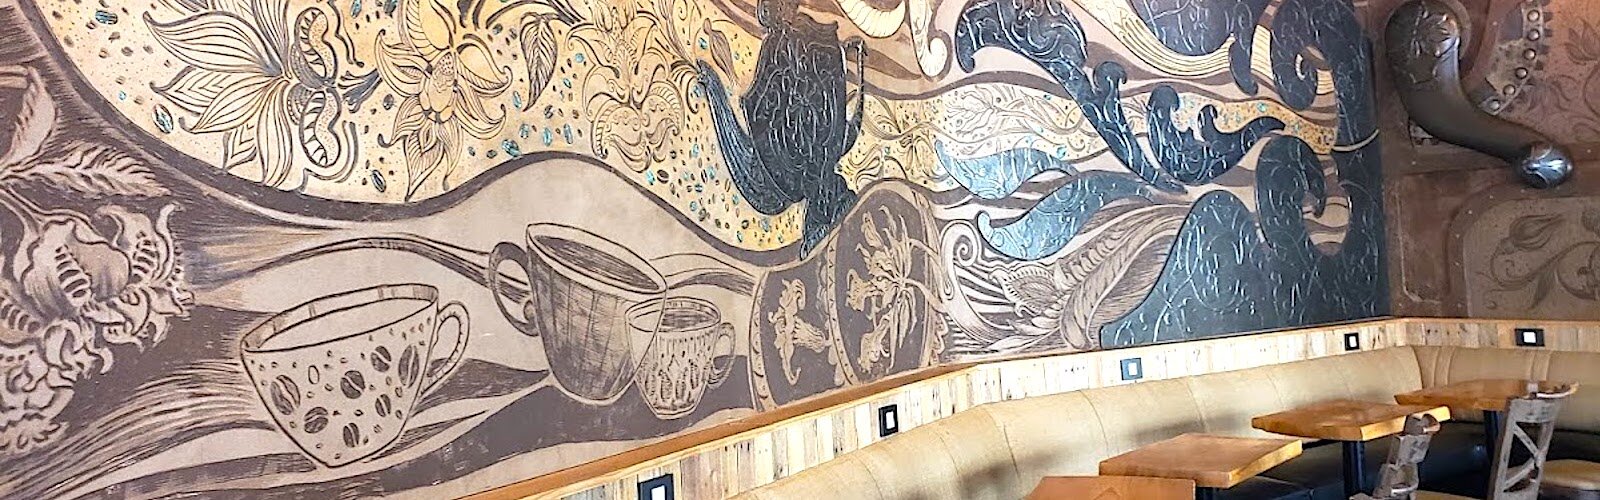 Funky murals on the walls of Grindhouse set the atmosphere for sipping coffee and sharing stories.